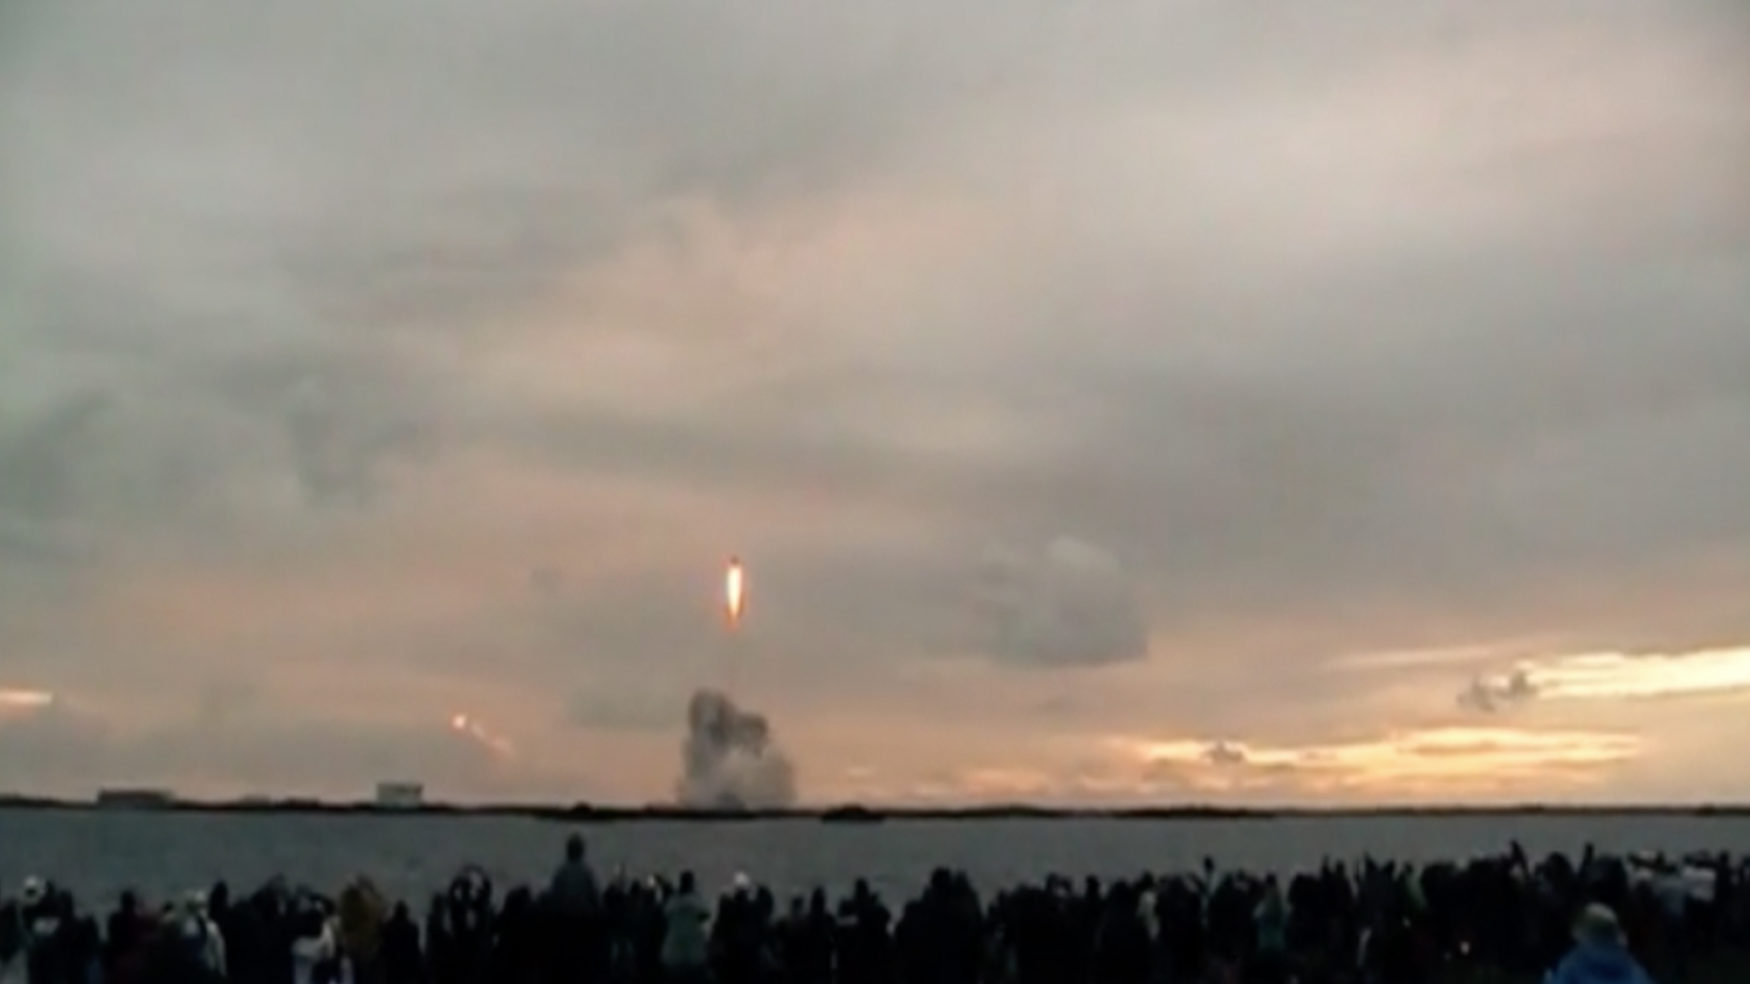 TAKE YOUR BEST SHOT: THE ORION TEST LAUNCH